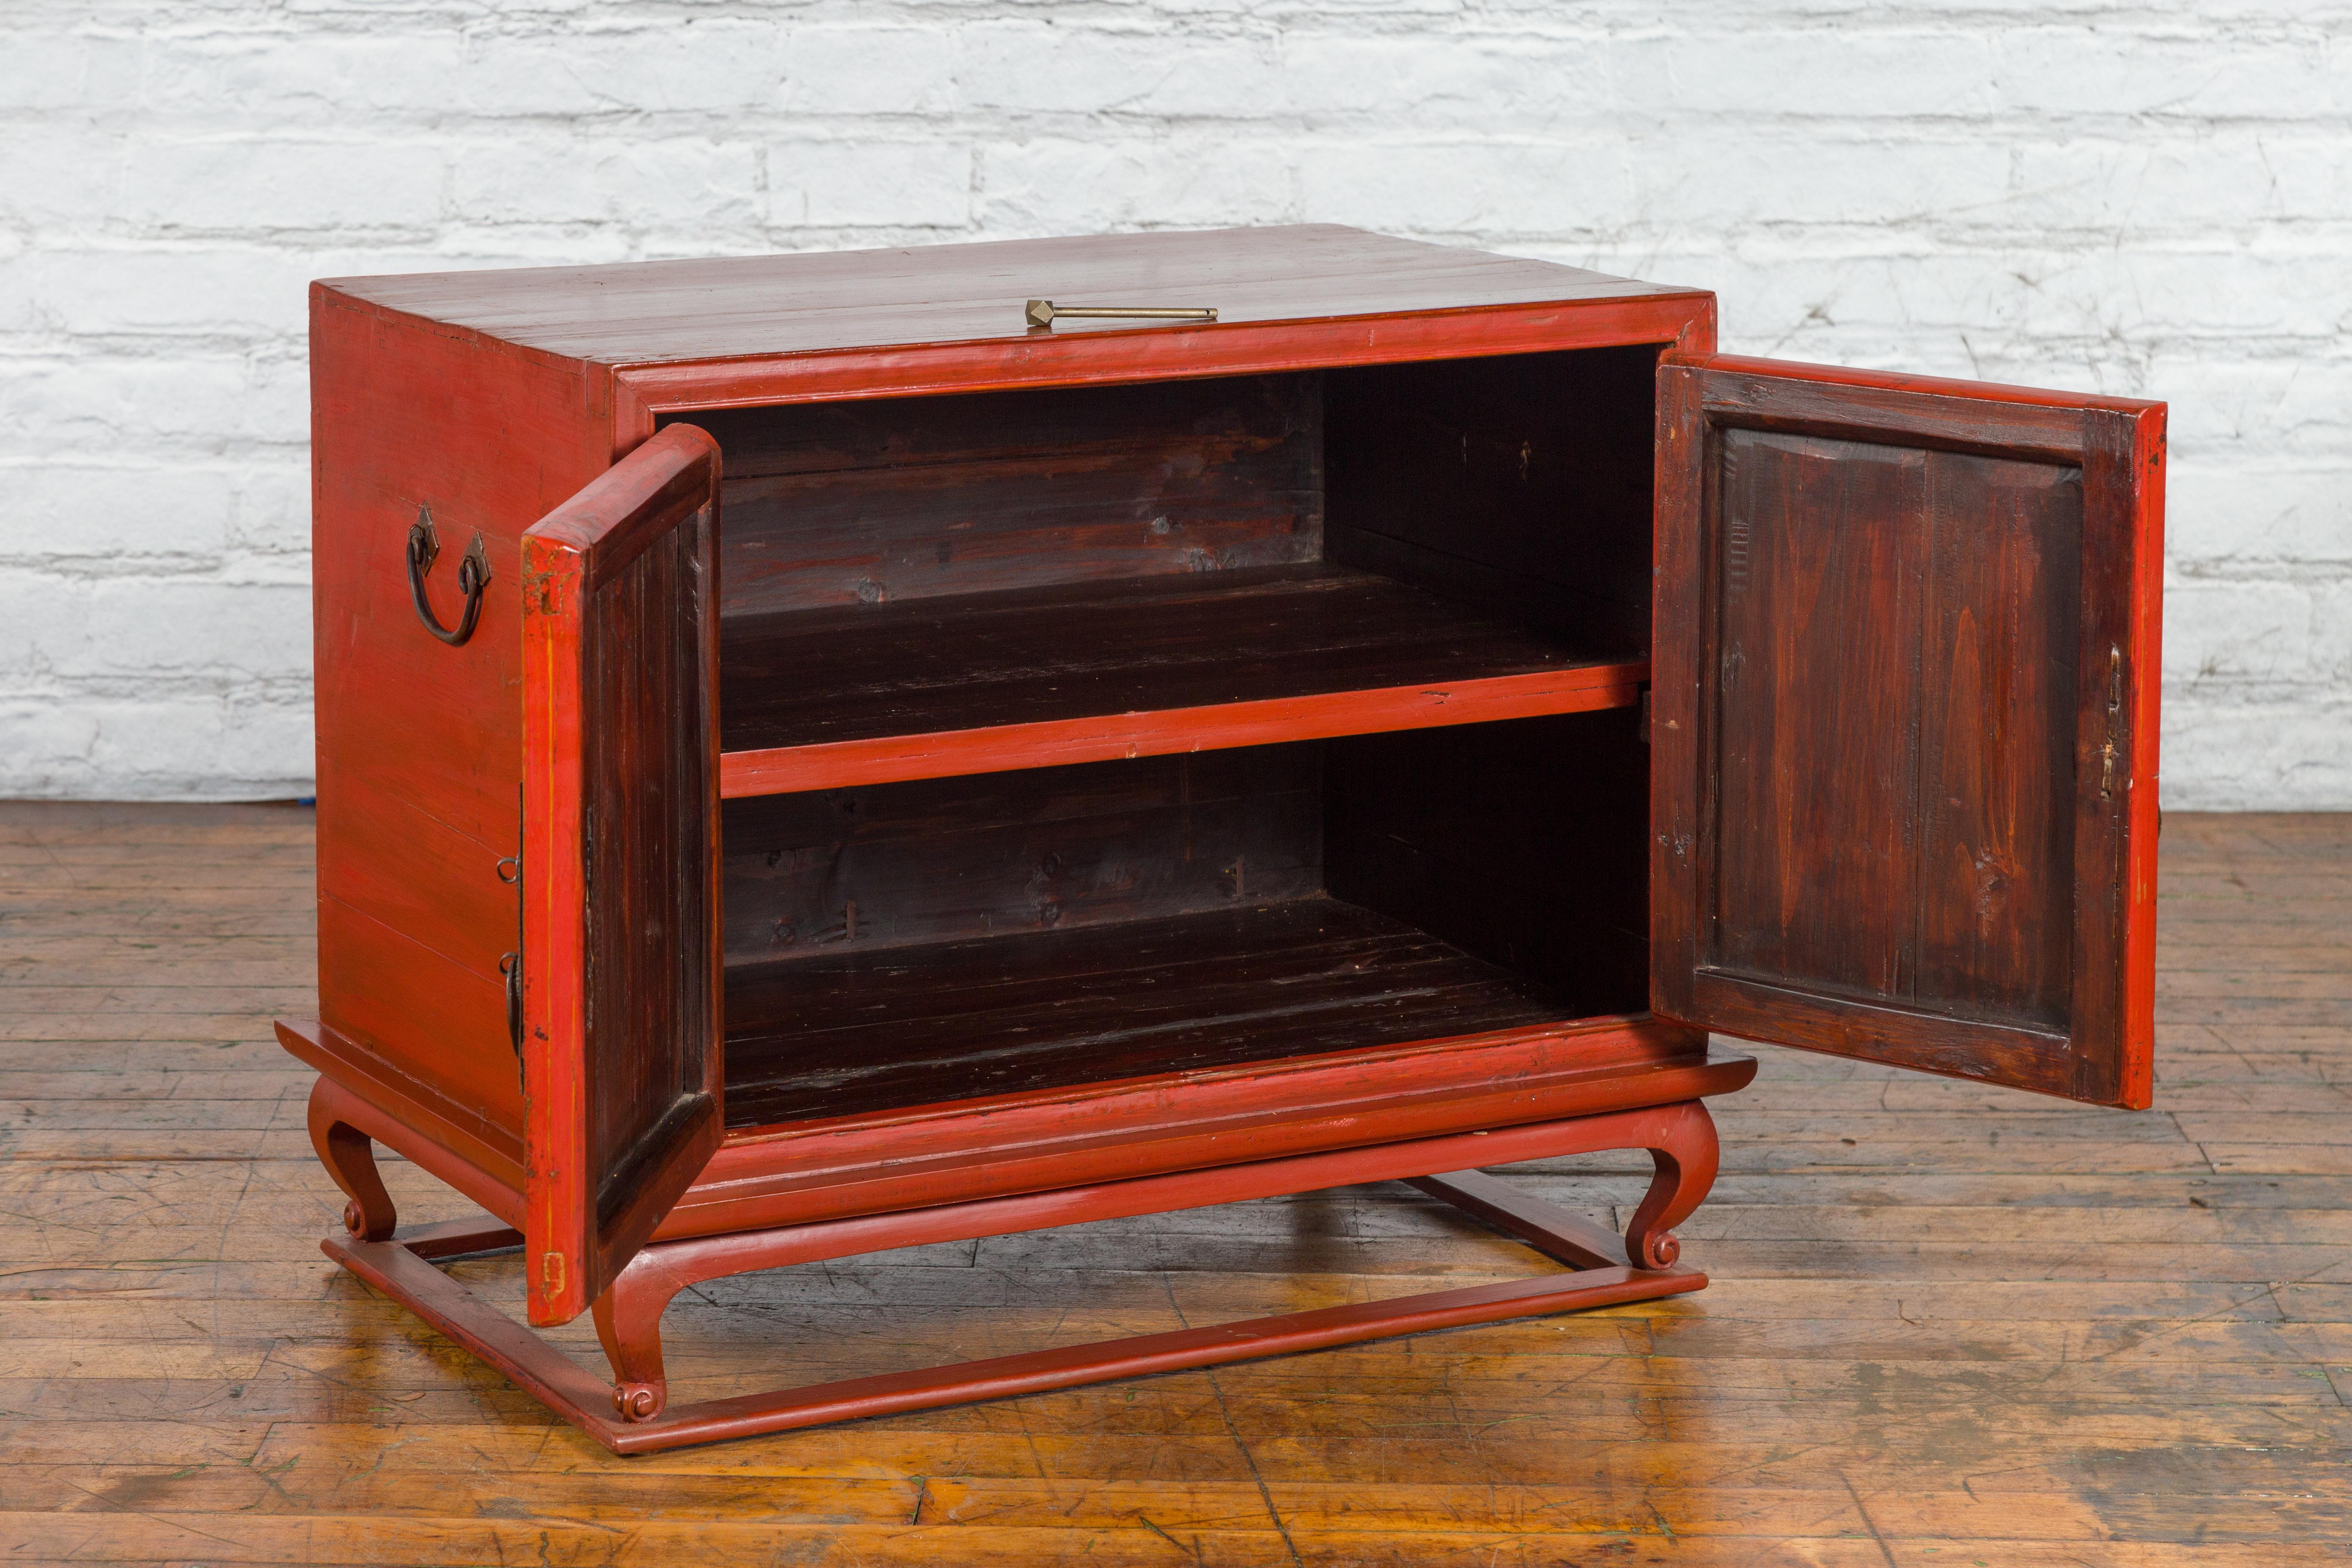 20th Century Vintage Chinese Red Lacquer Small Cabinet with Dark Accents and Cabriole Legs For Sale